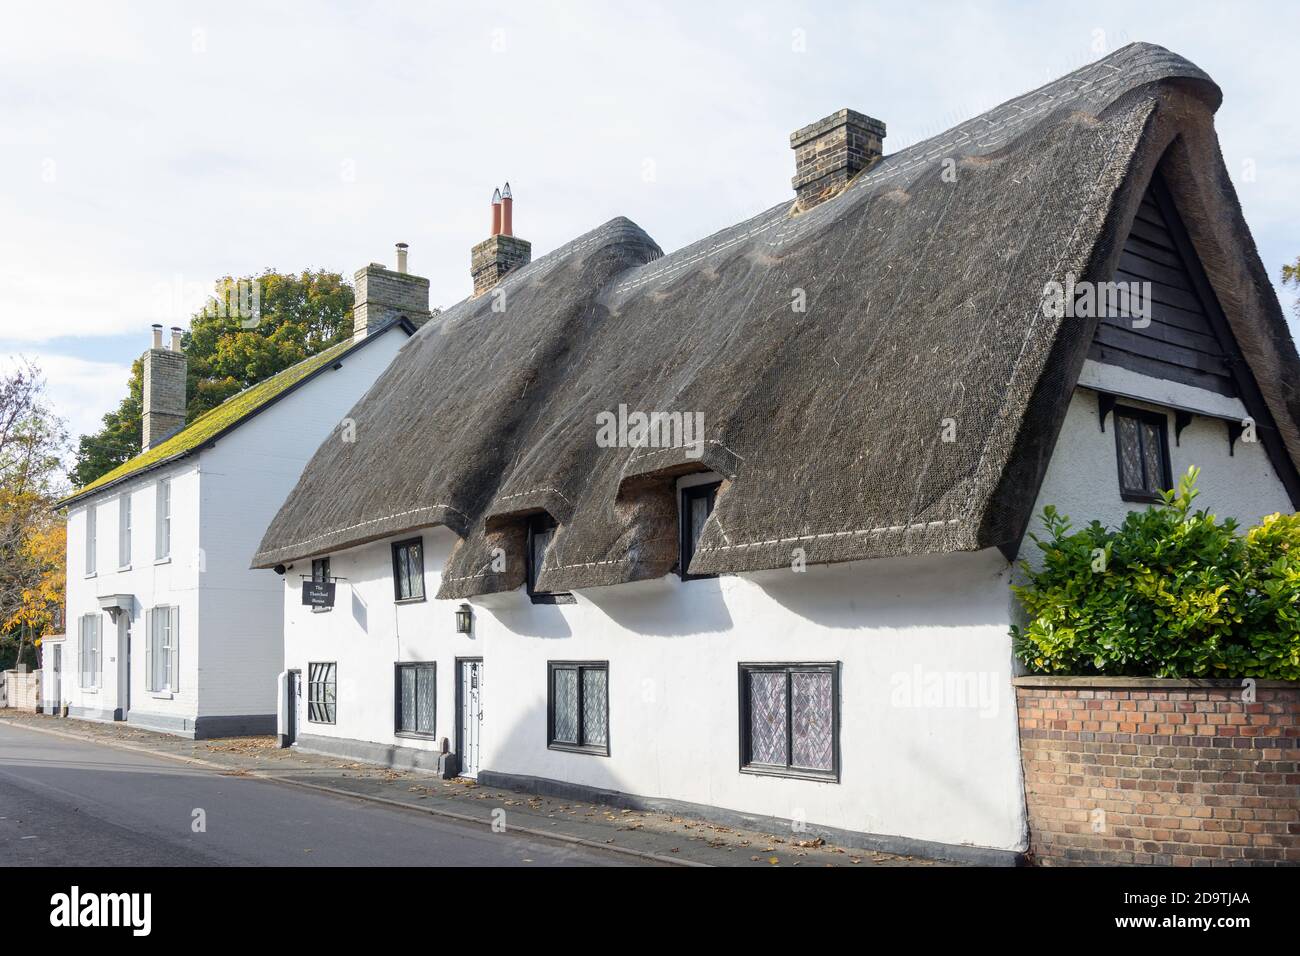 Period house and thatched cottage, High Street, Melbourn, Cambridgeshire, England, United Kingdom Stock Photo